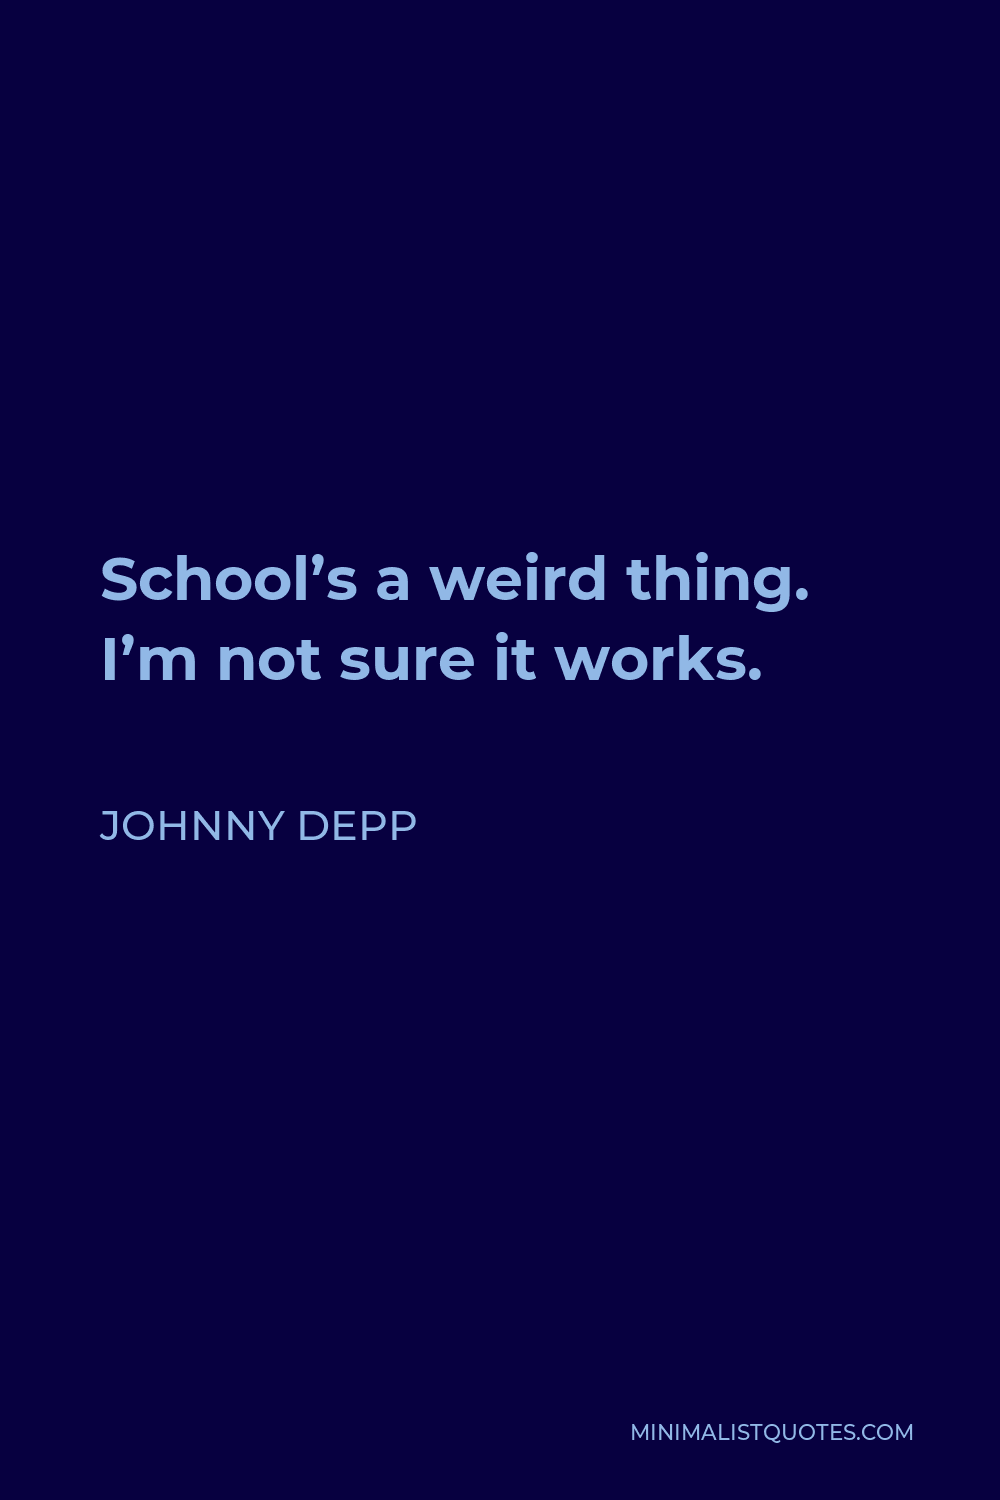 Johnny Depp Quote - School’s a weird thing. I’m not sure it works.